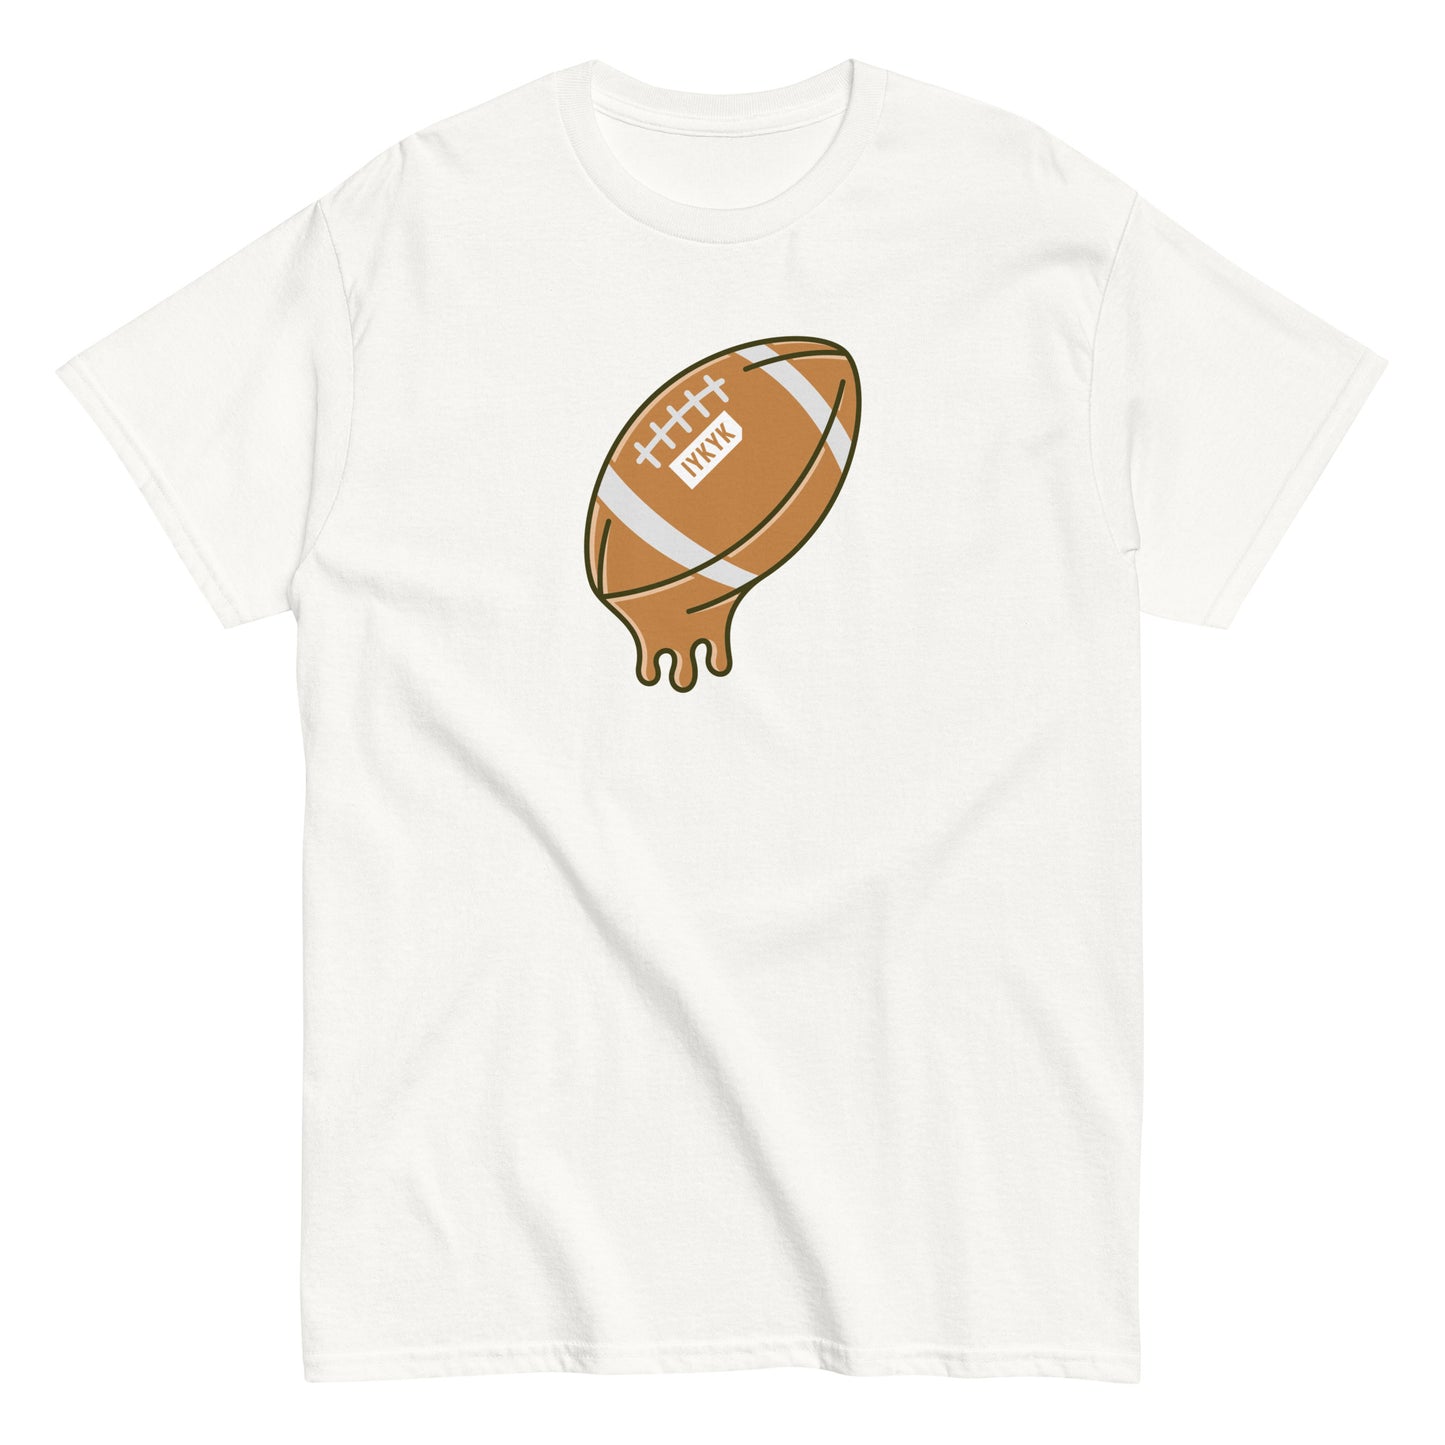 Classic Everyday Melting Football Just For Fun Tee